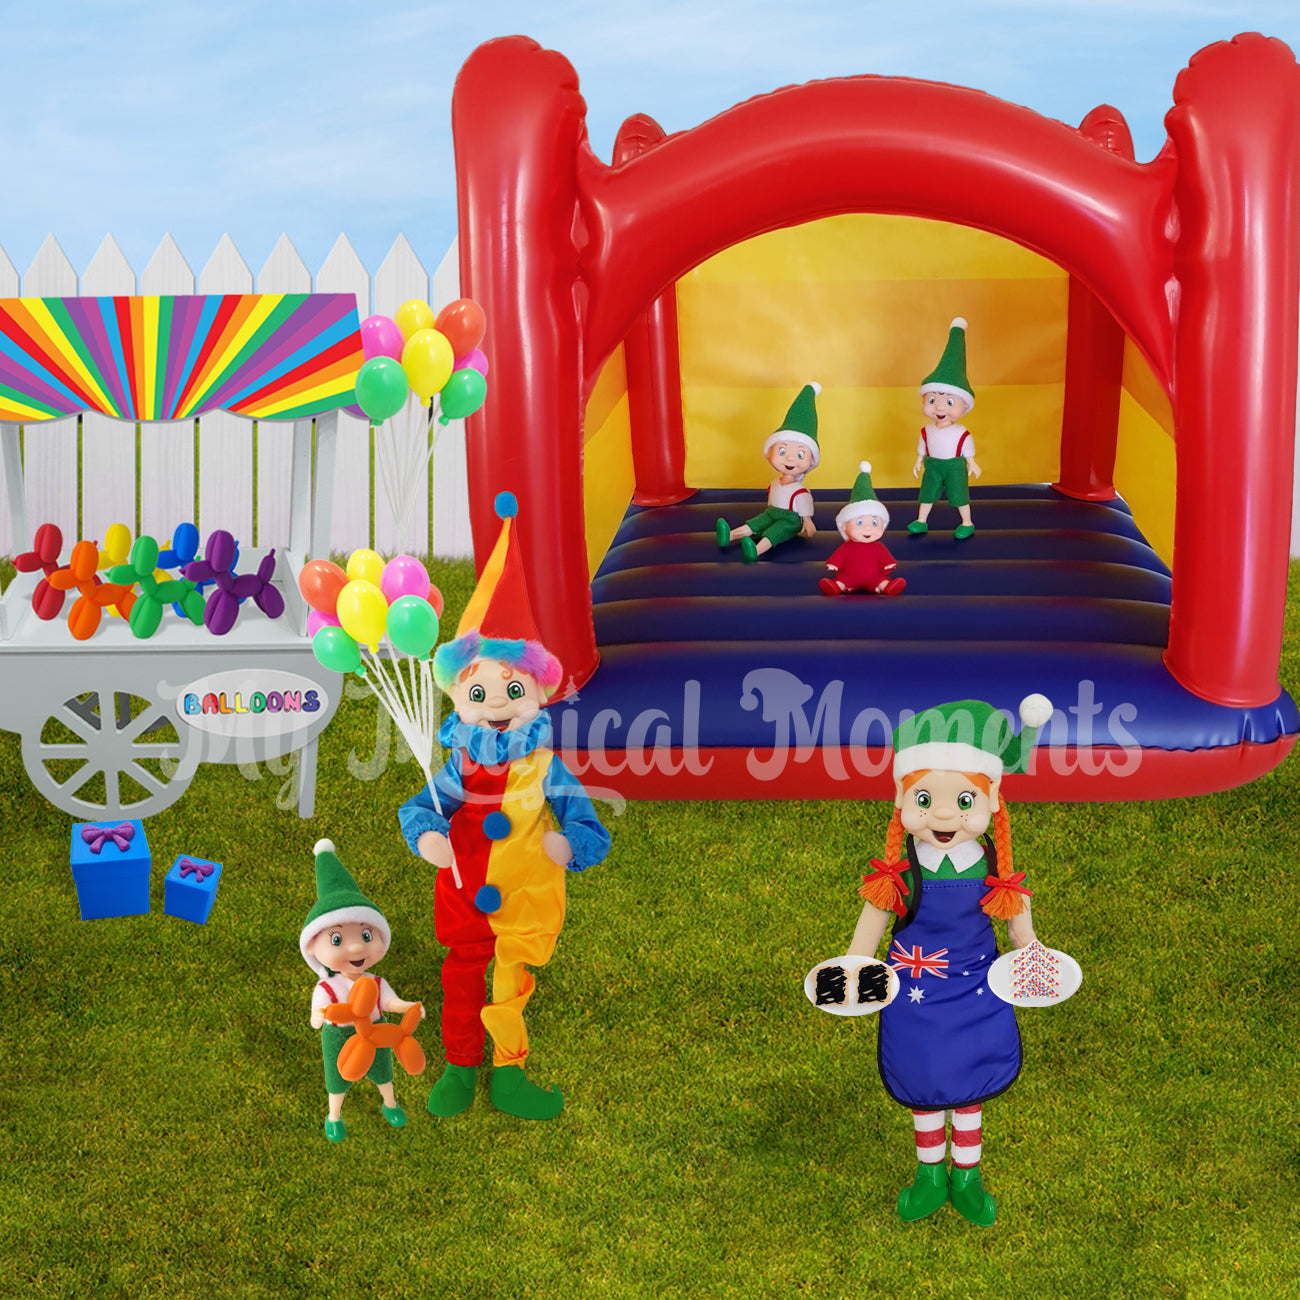 Elves having a birthday party. With a miniature inflatable jumping castle, party food, balloons and an elf wearing a clown costume